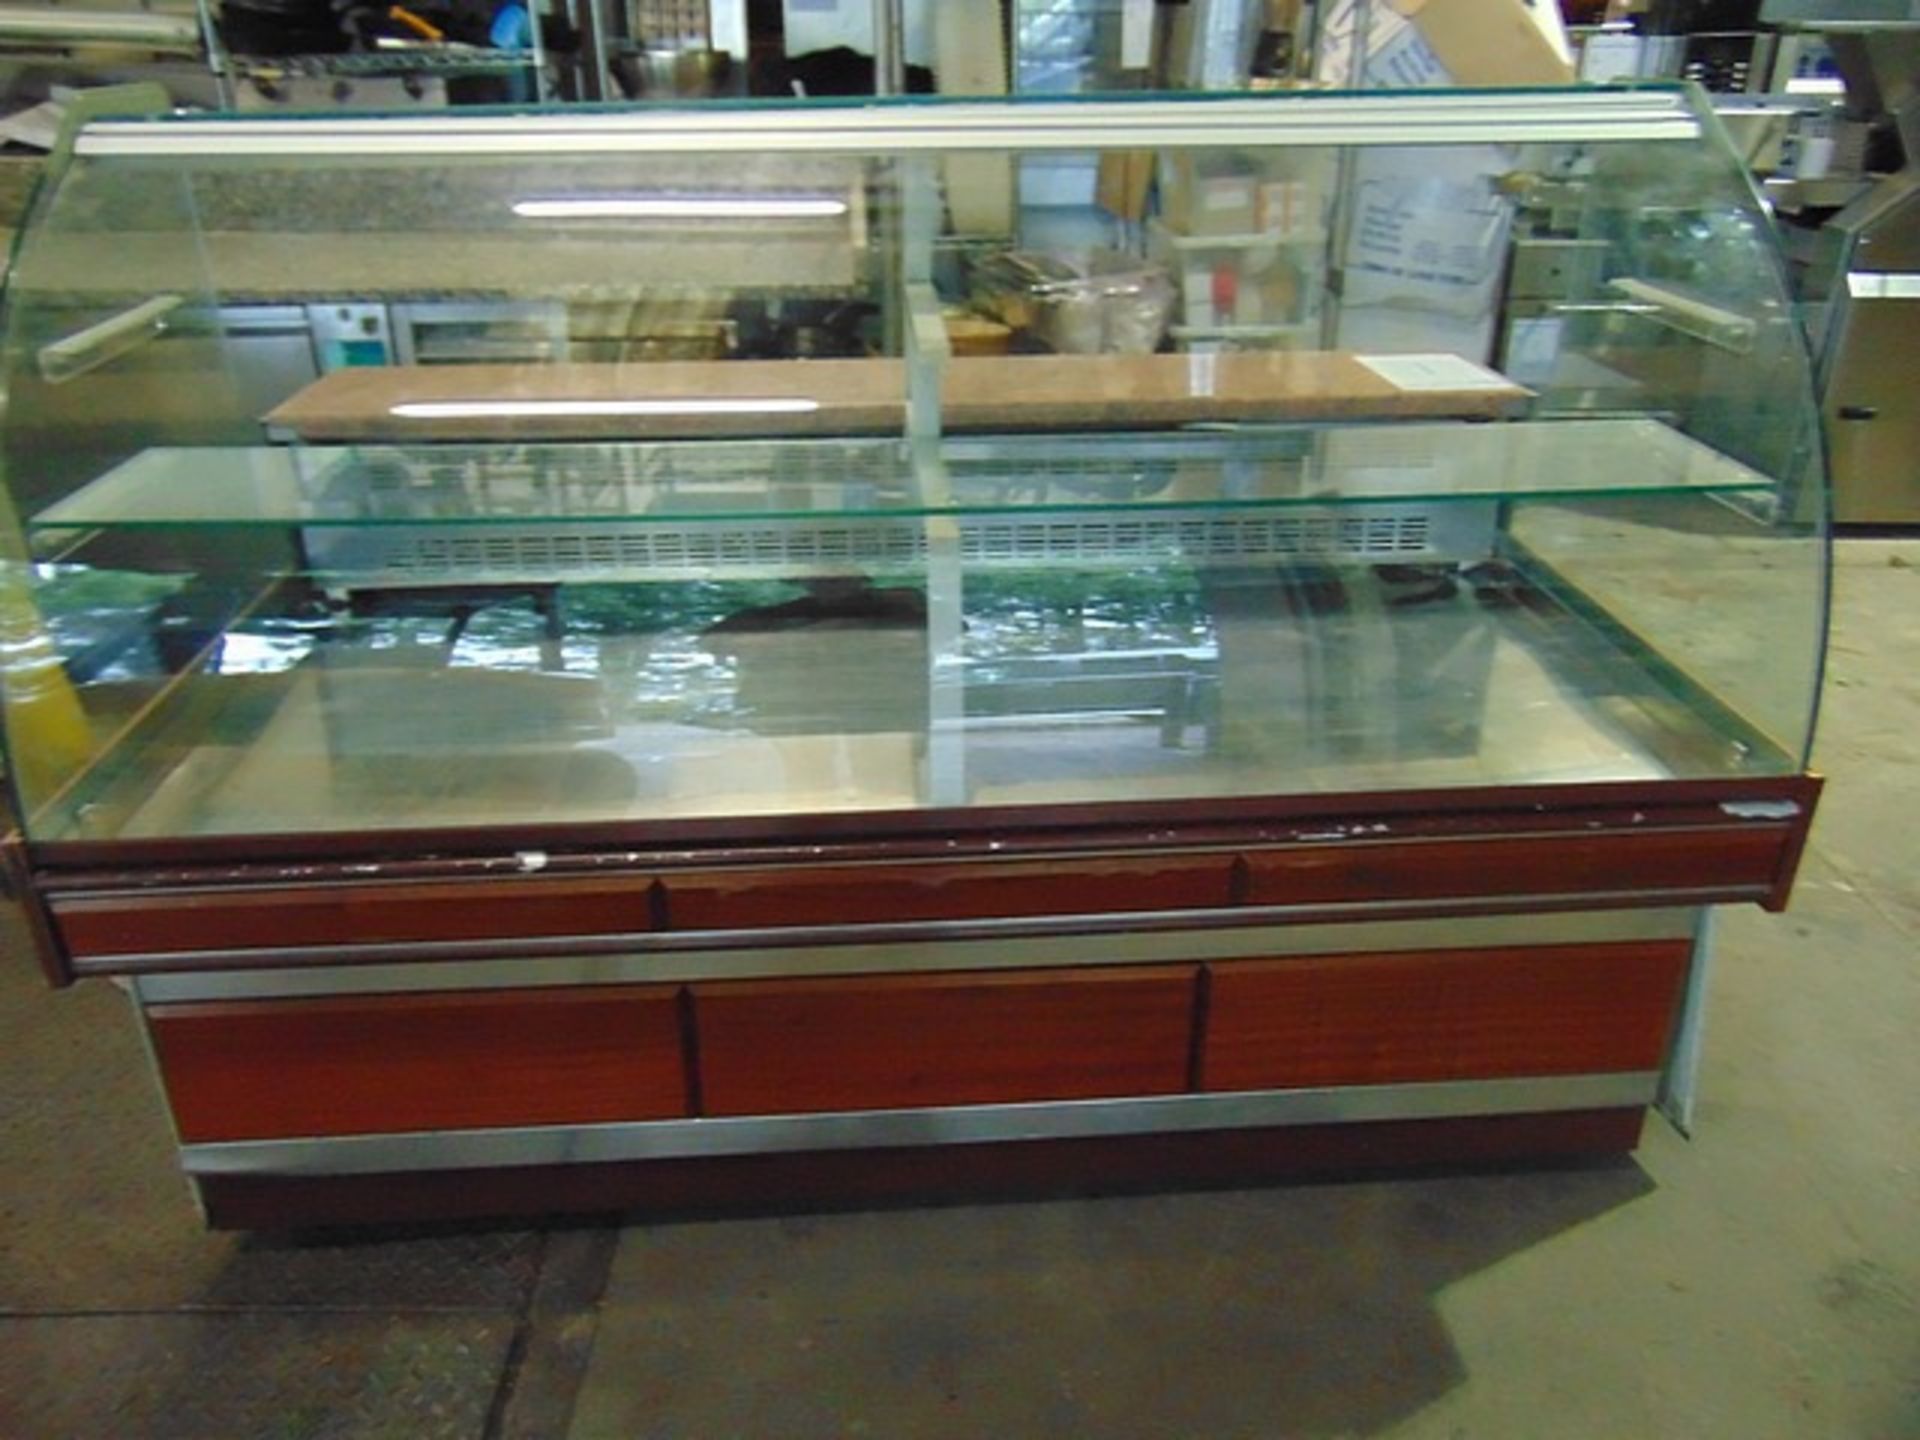 Trimco refrigerated serve over counter fully automatic static cooling interior light digital